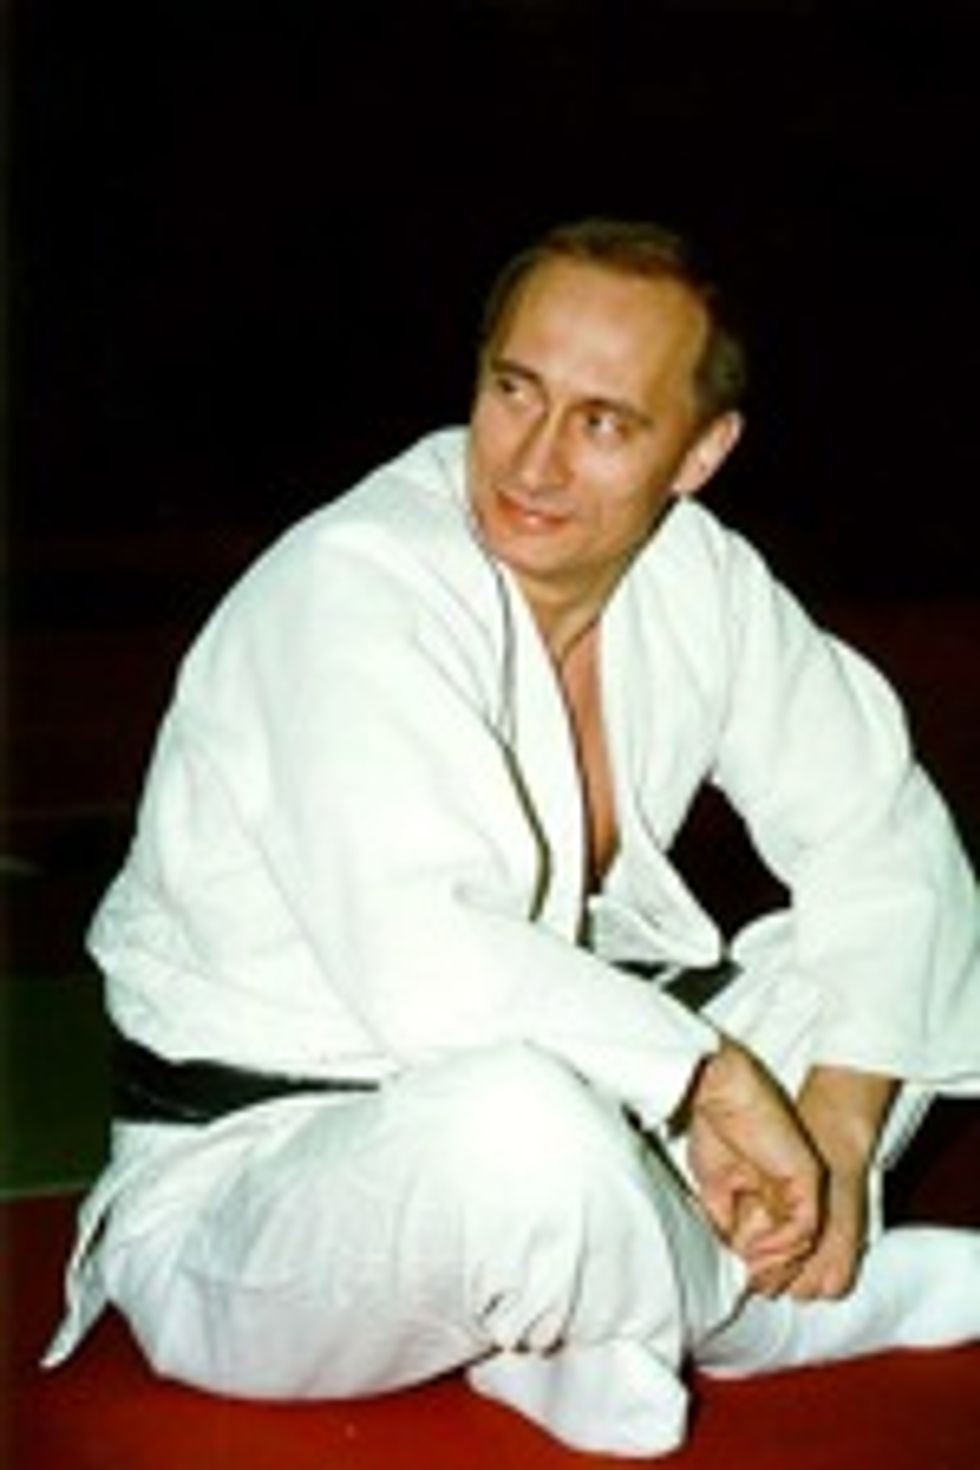 Putin Releases Long-Awaited Judo How-To DVD